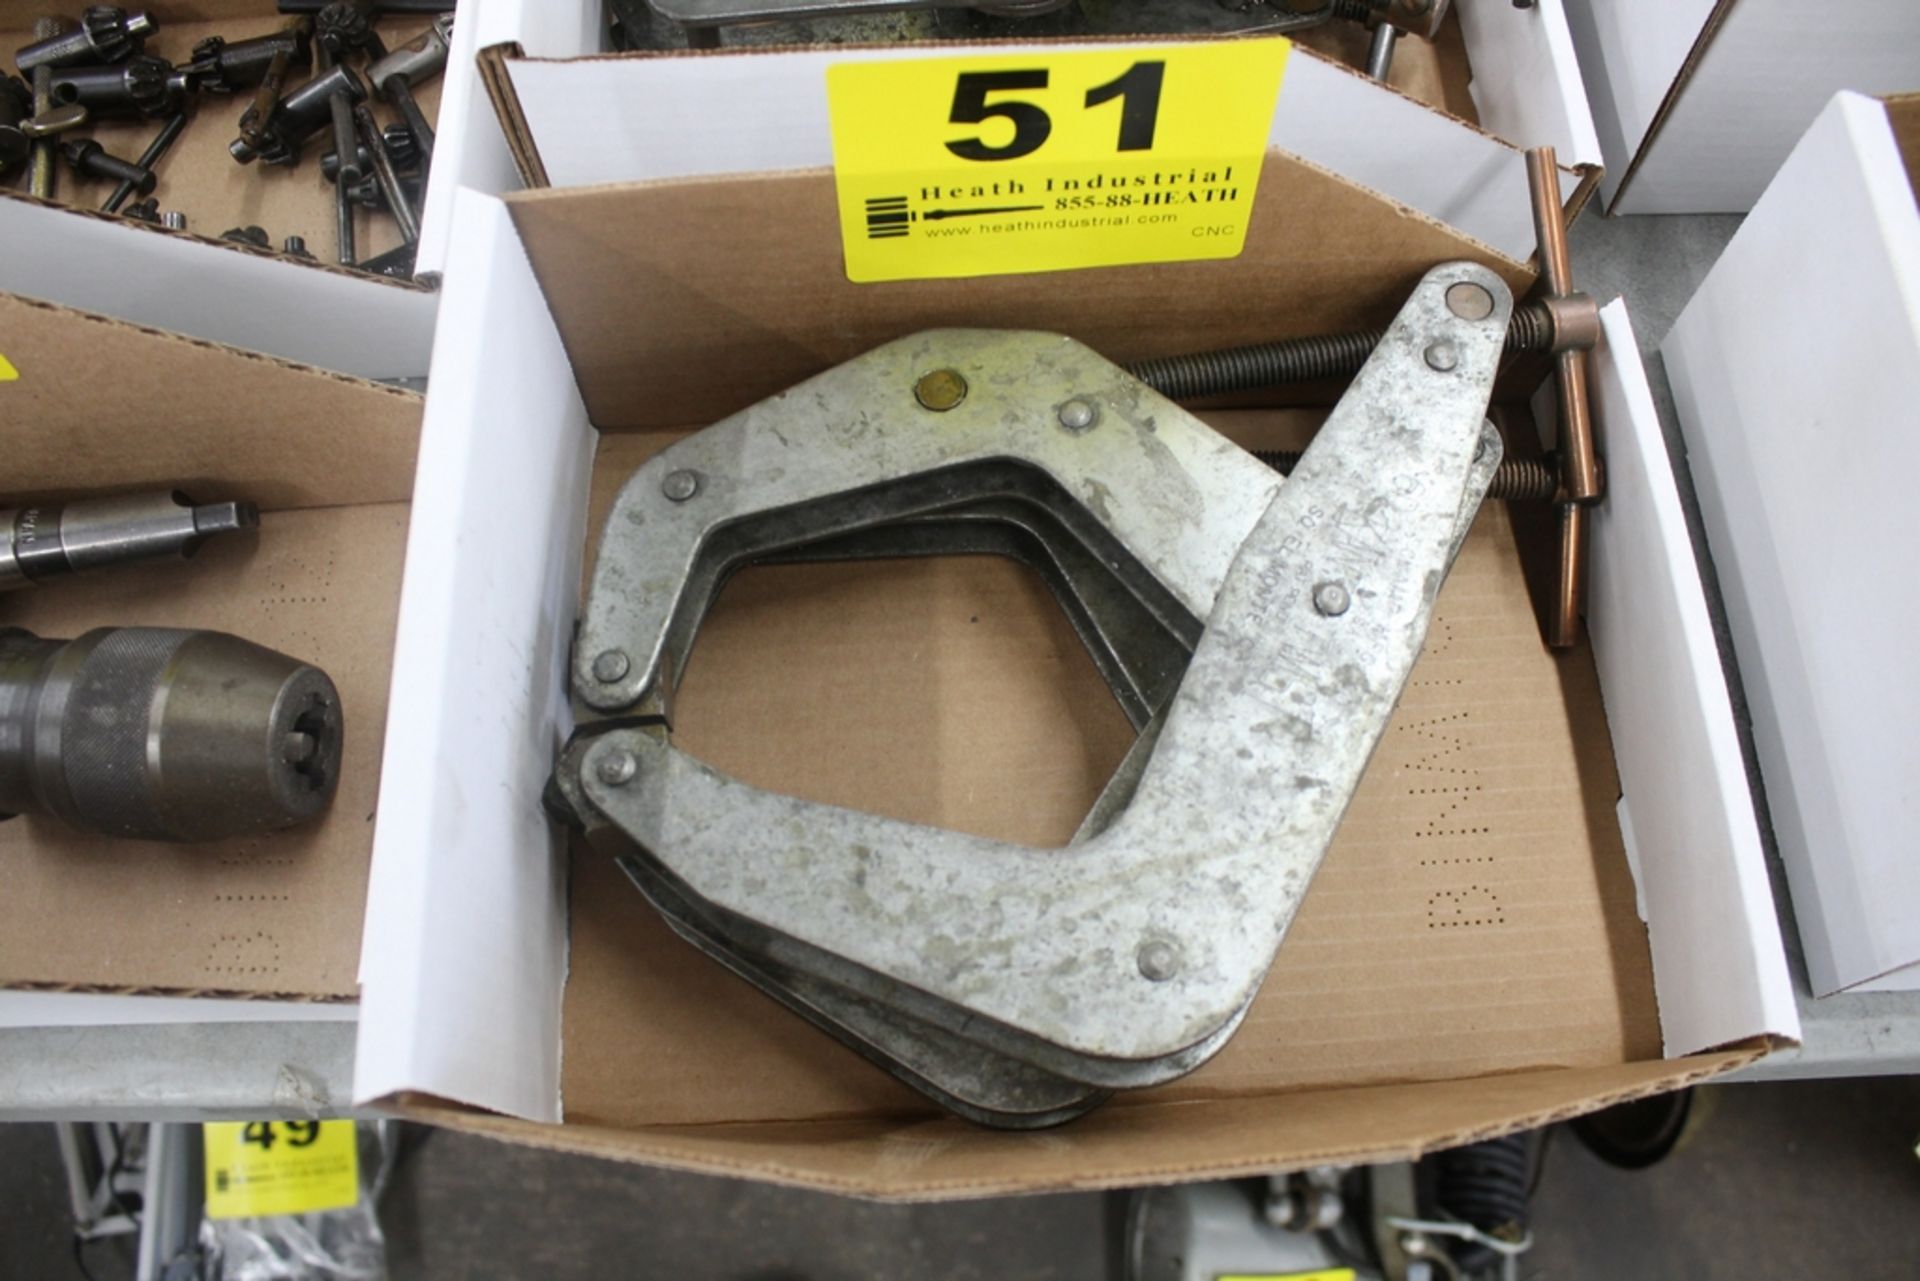 (2) KANT-TWIST MODEL 6D 421 CLAMPS IN BOX